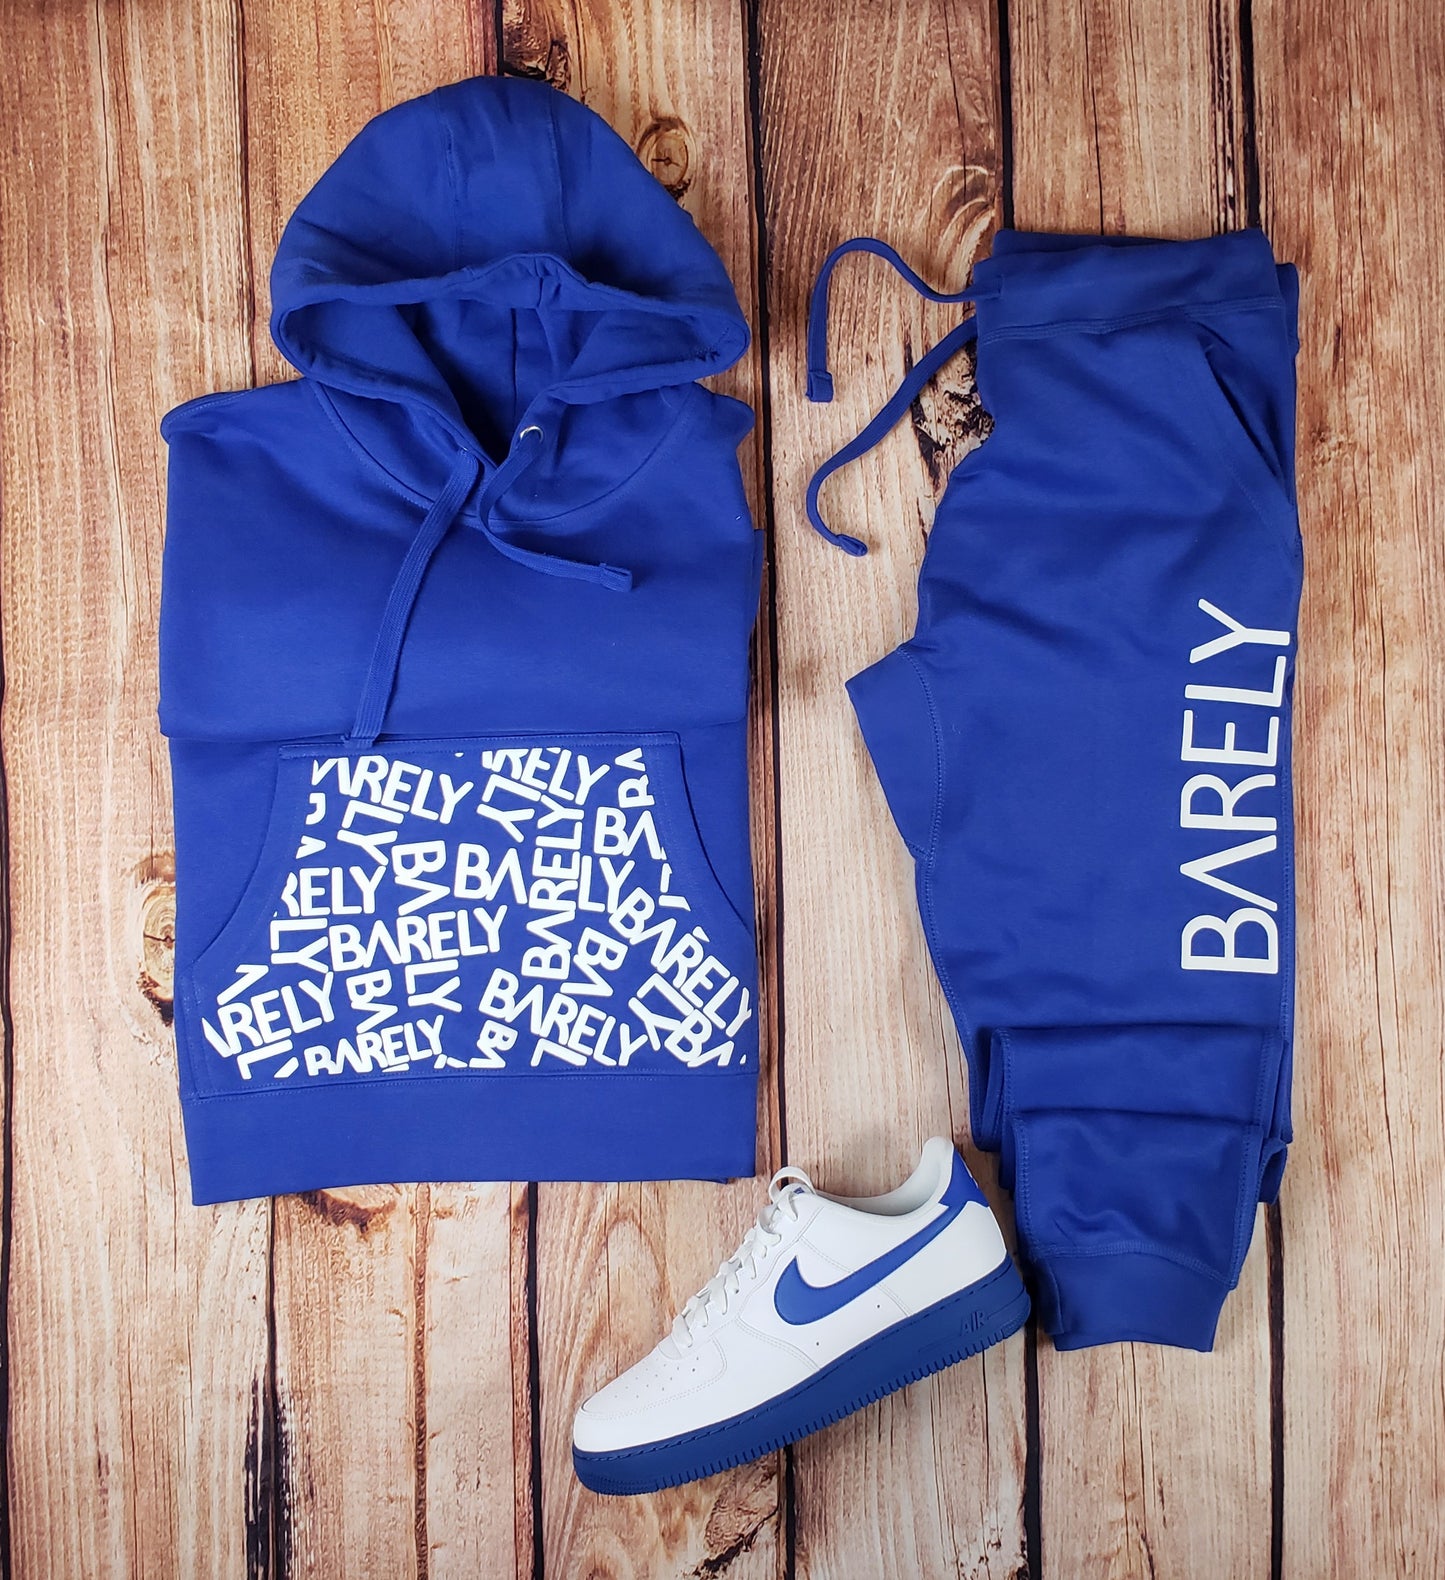 Barely "Scrabble Logo" Hoodie - Barely Ordinary